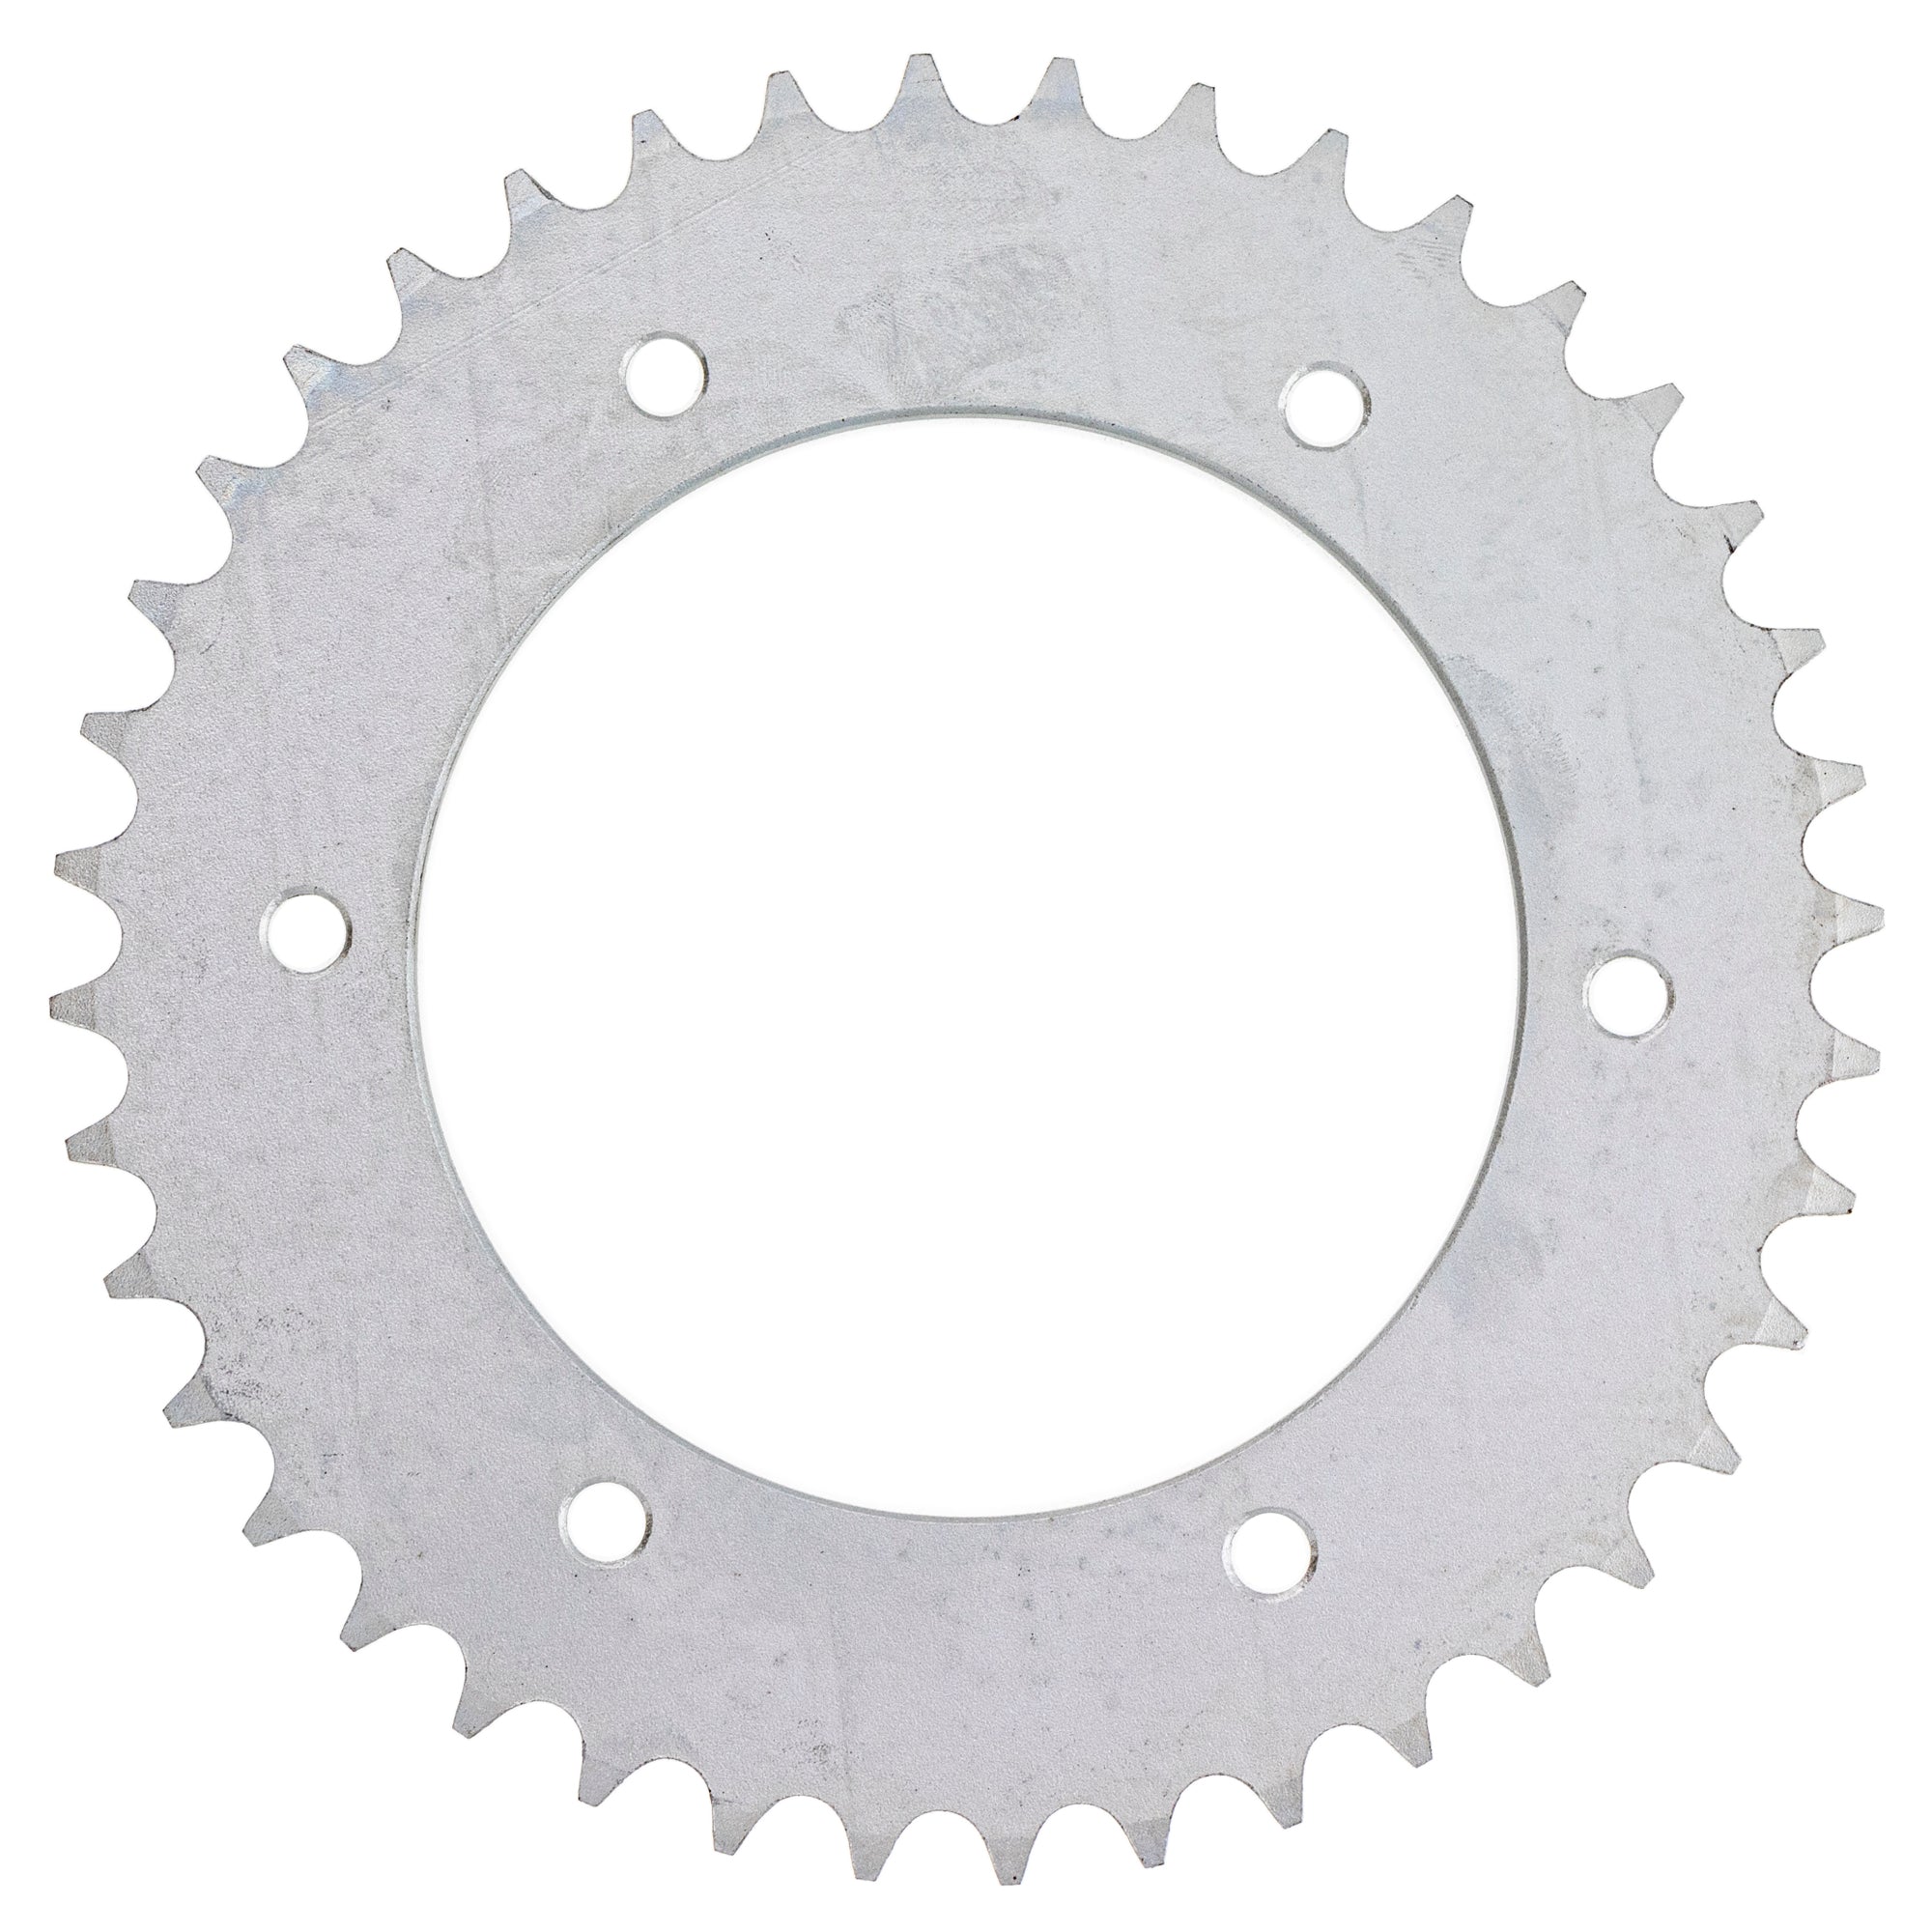 520 Pitch Front 14T Rear 40T Drive Sprocket Kit for KTM 250 300 EGS